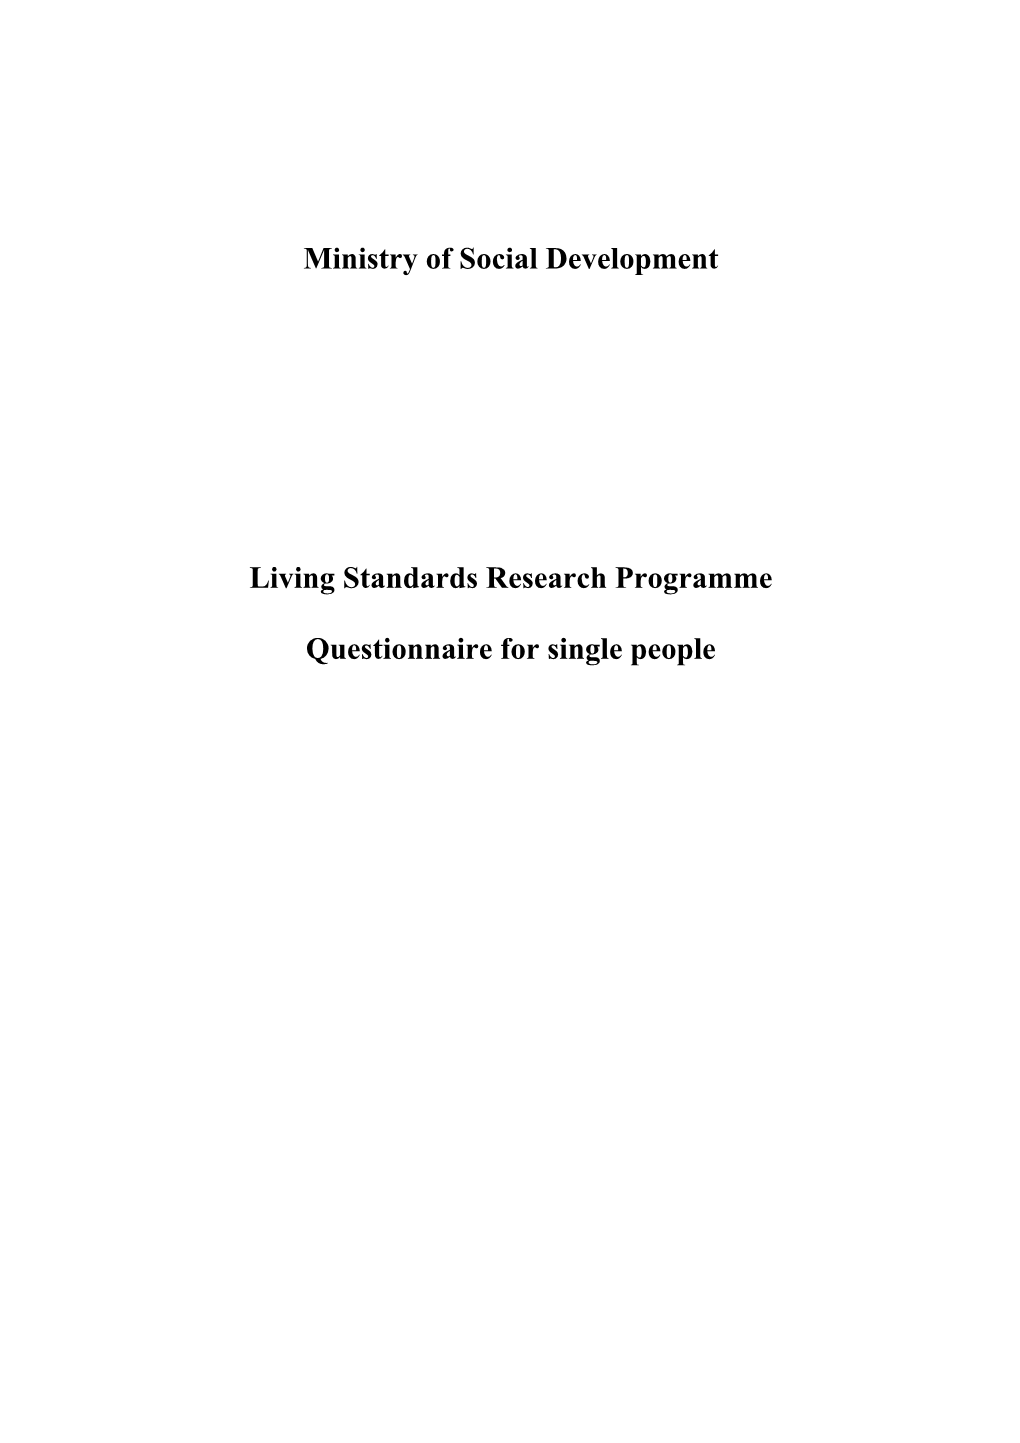 Living Standards Research Programme